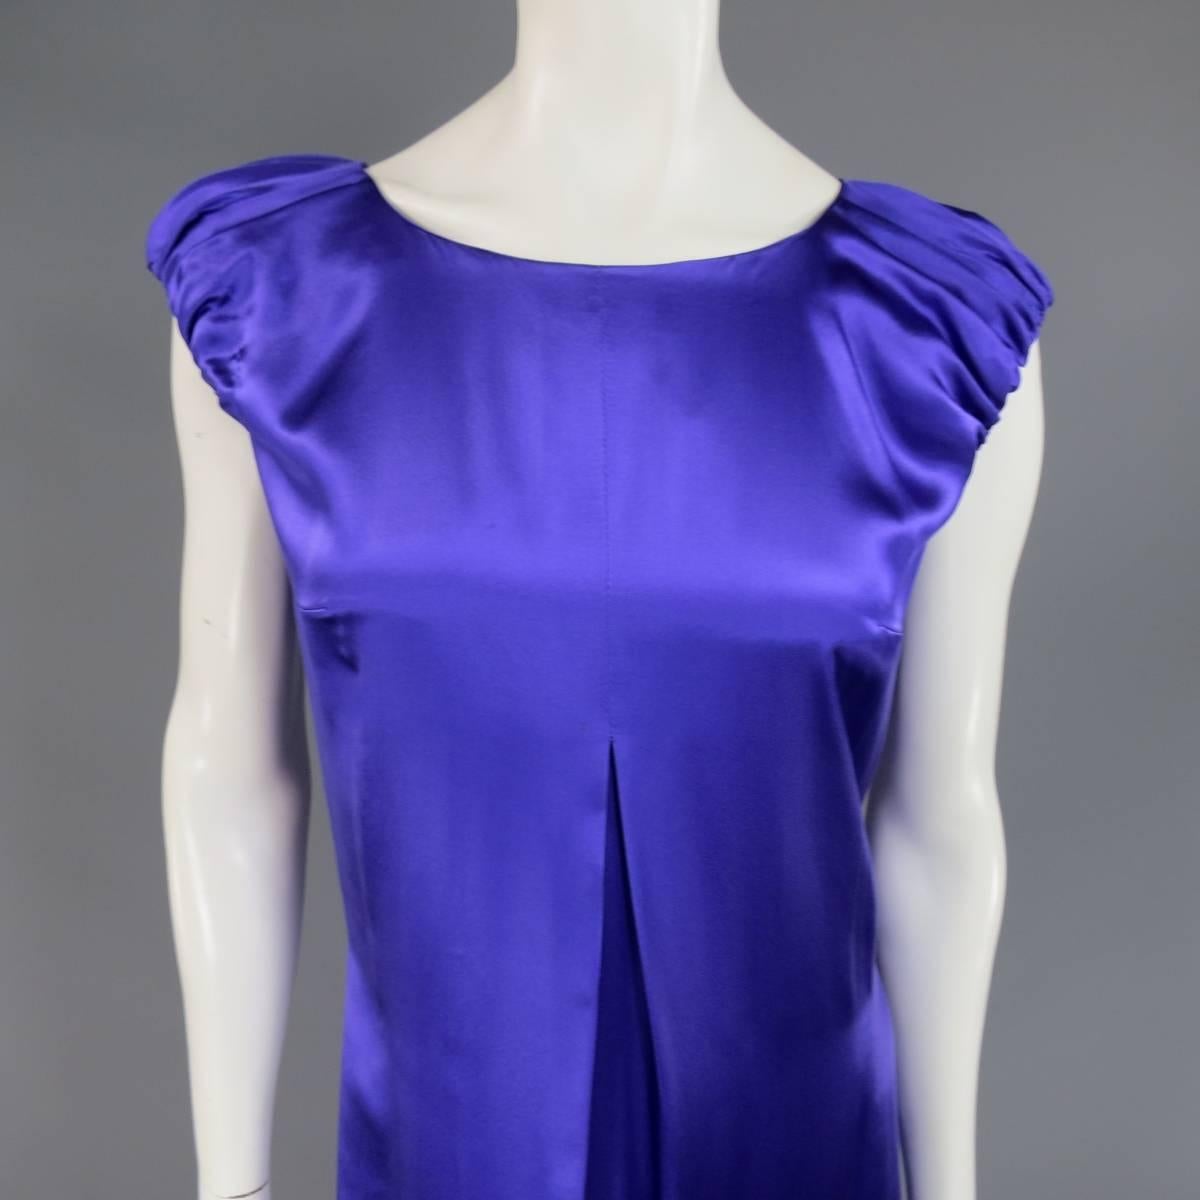 This gorgeous DOLCE & GABBANA cocktail dress comes in a purple silk satin and features an A line silhouette, pleated front, scoop neck, short gathered puff sleeves, and back zip closure. Small imperfection in detail shot. Made in Italy.
 
Good